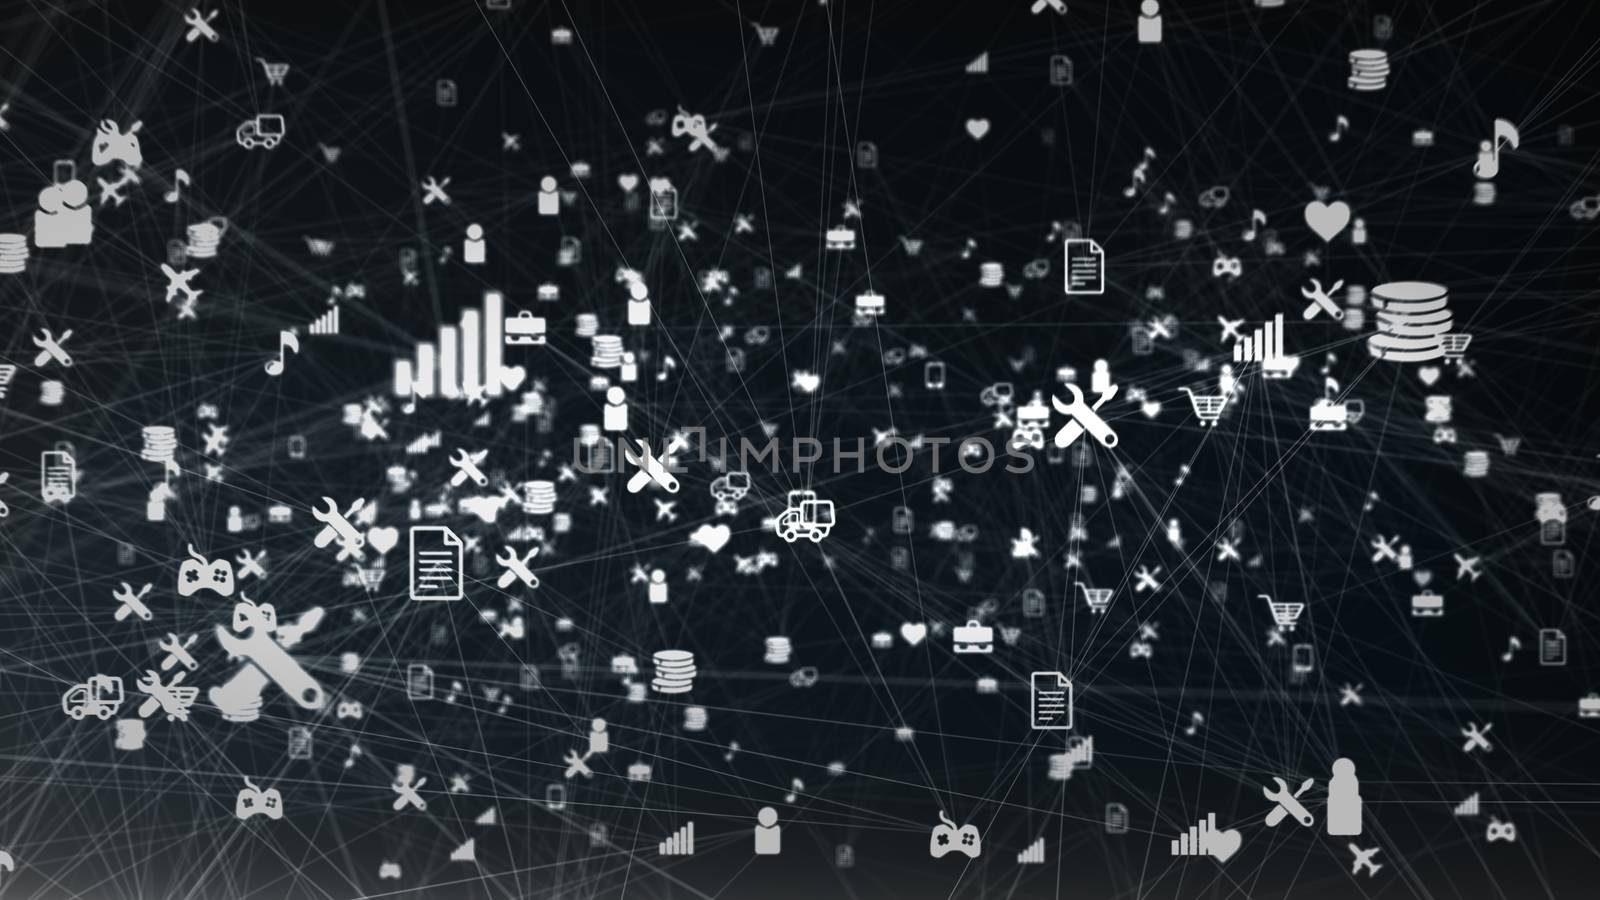 Volumetric 3d illustration of a black cyberspace with many stripes connecting a diversity of social network symbols with texts, trucks and musical notes.